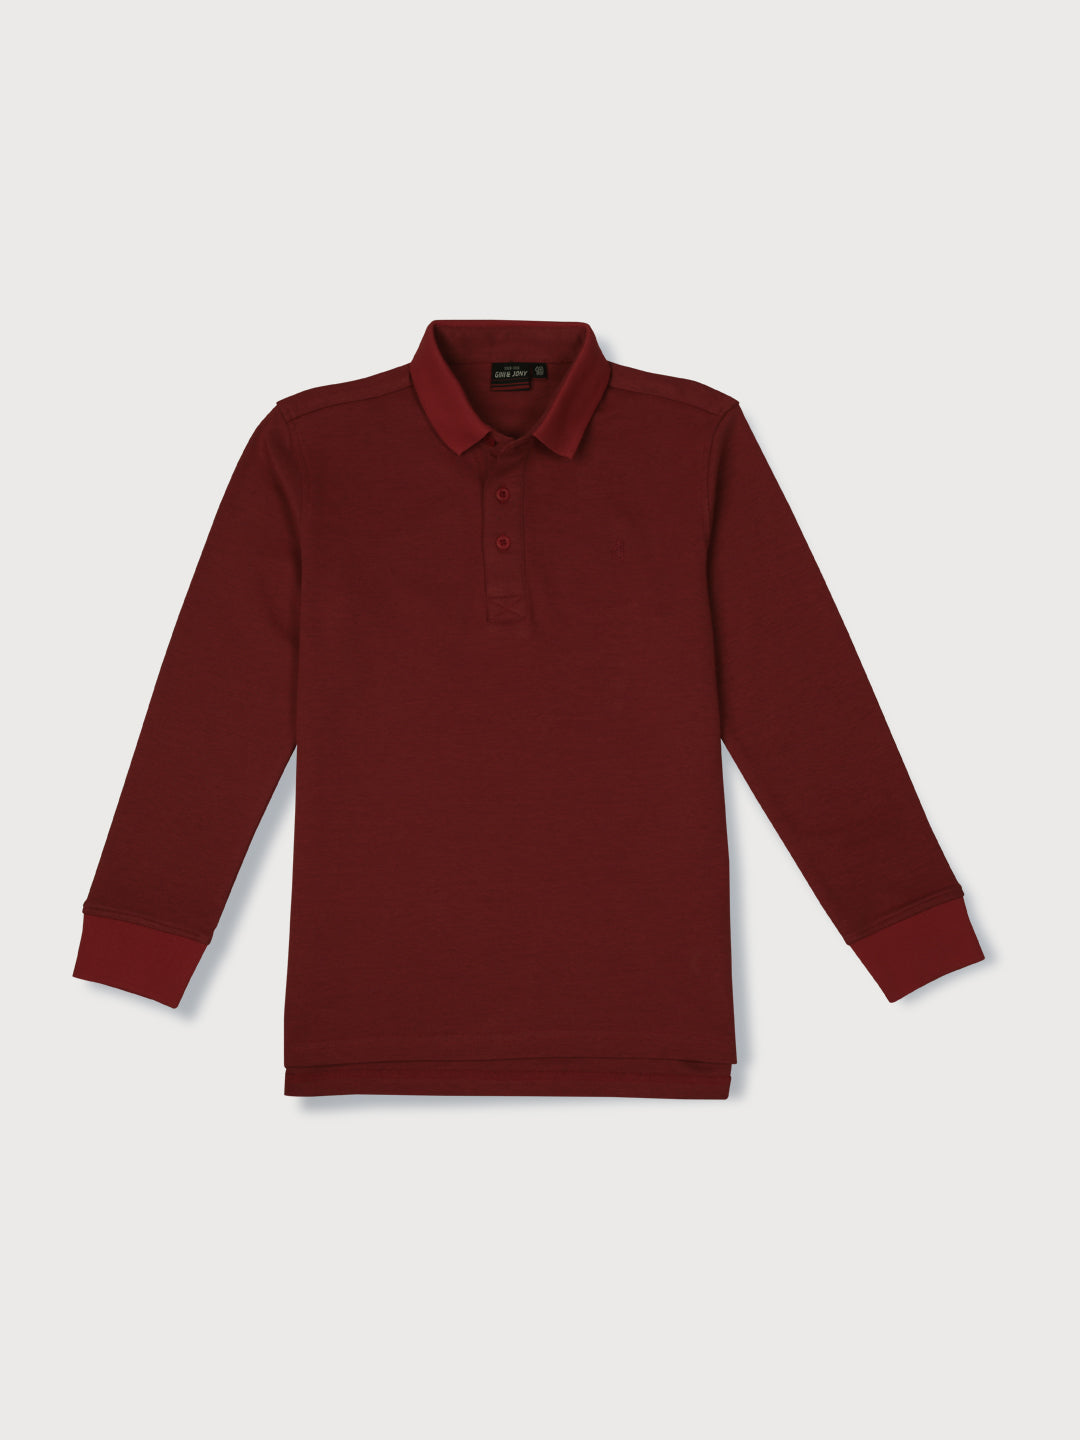 Boys Maroon Solid Woven Polo T-Shirt